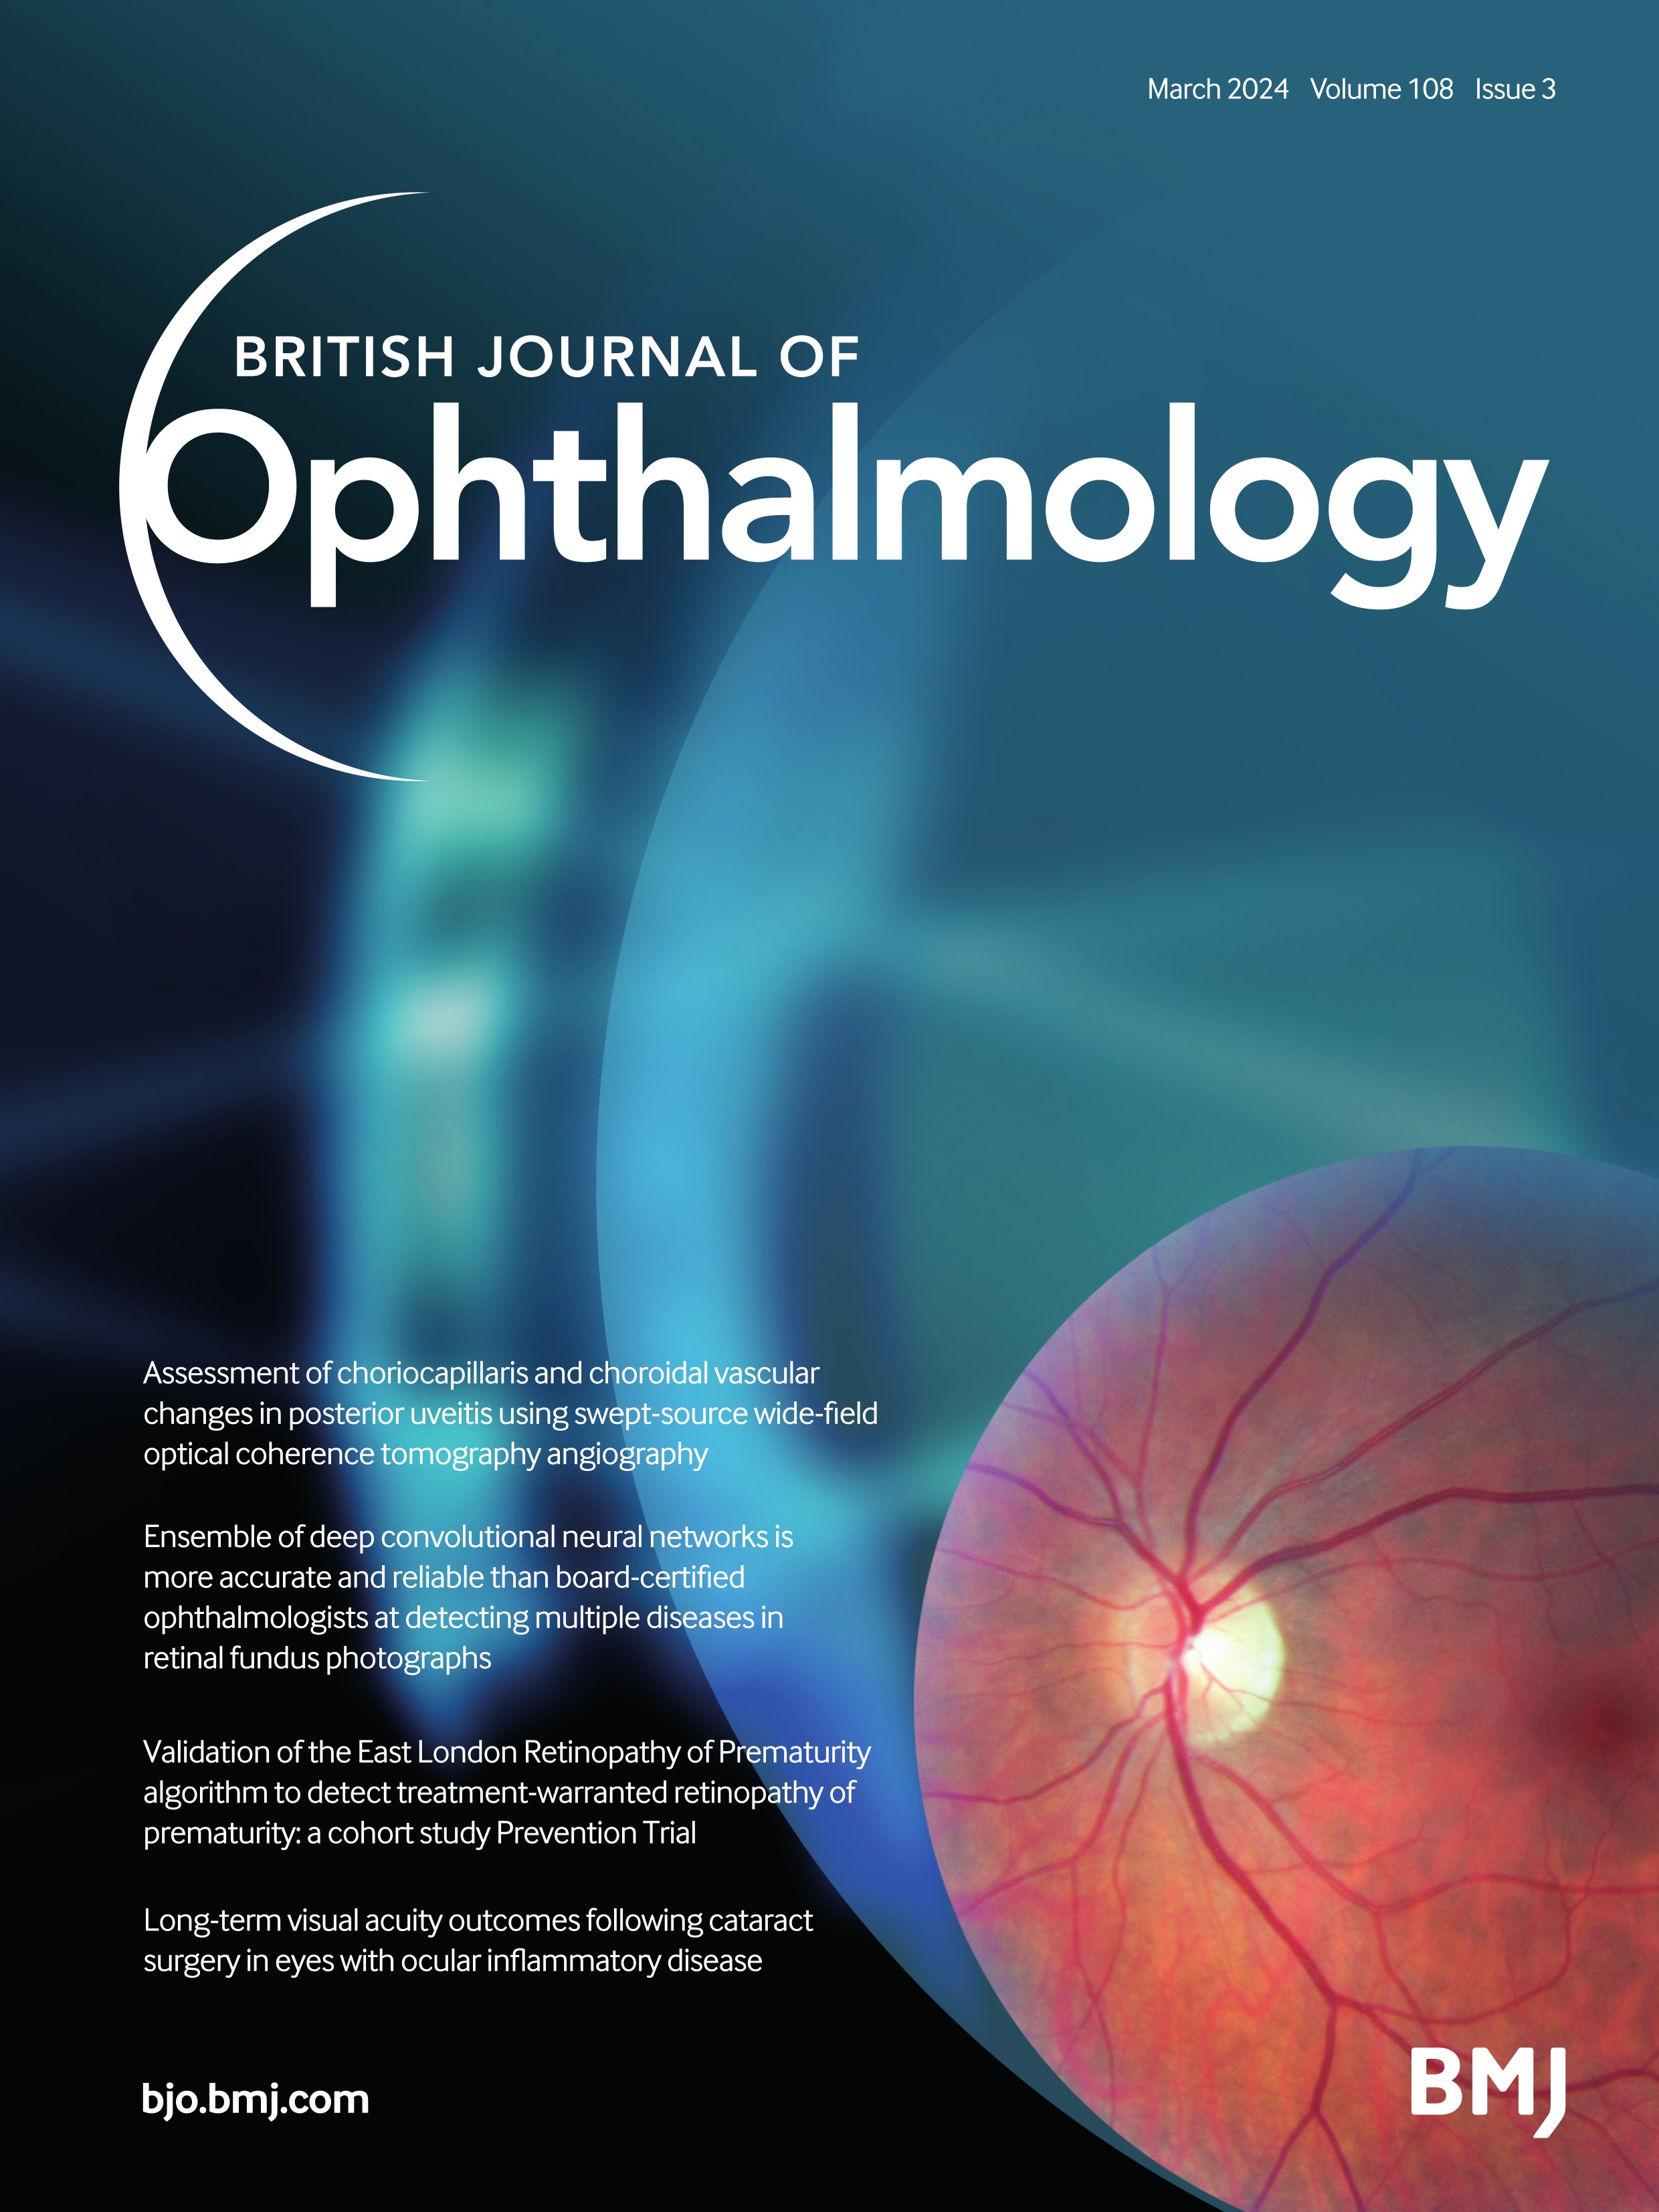 Assessment of choriocapillaris and choroidal vascular changes in posterior uveitis using swept-source wide-field optical coherence tomography angiography